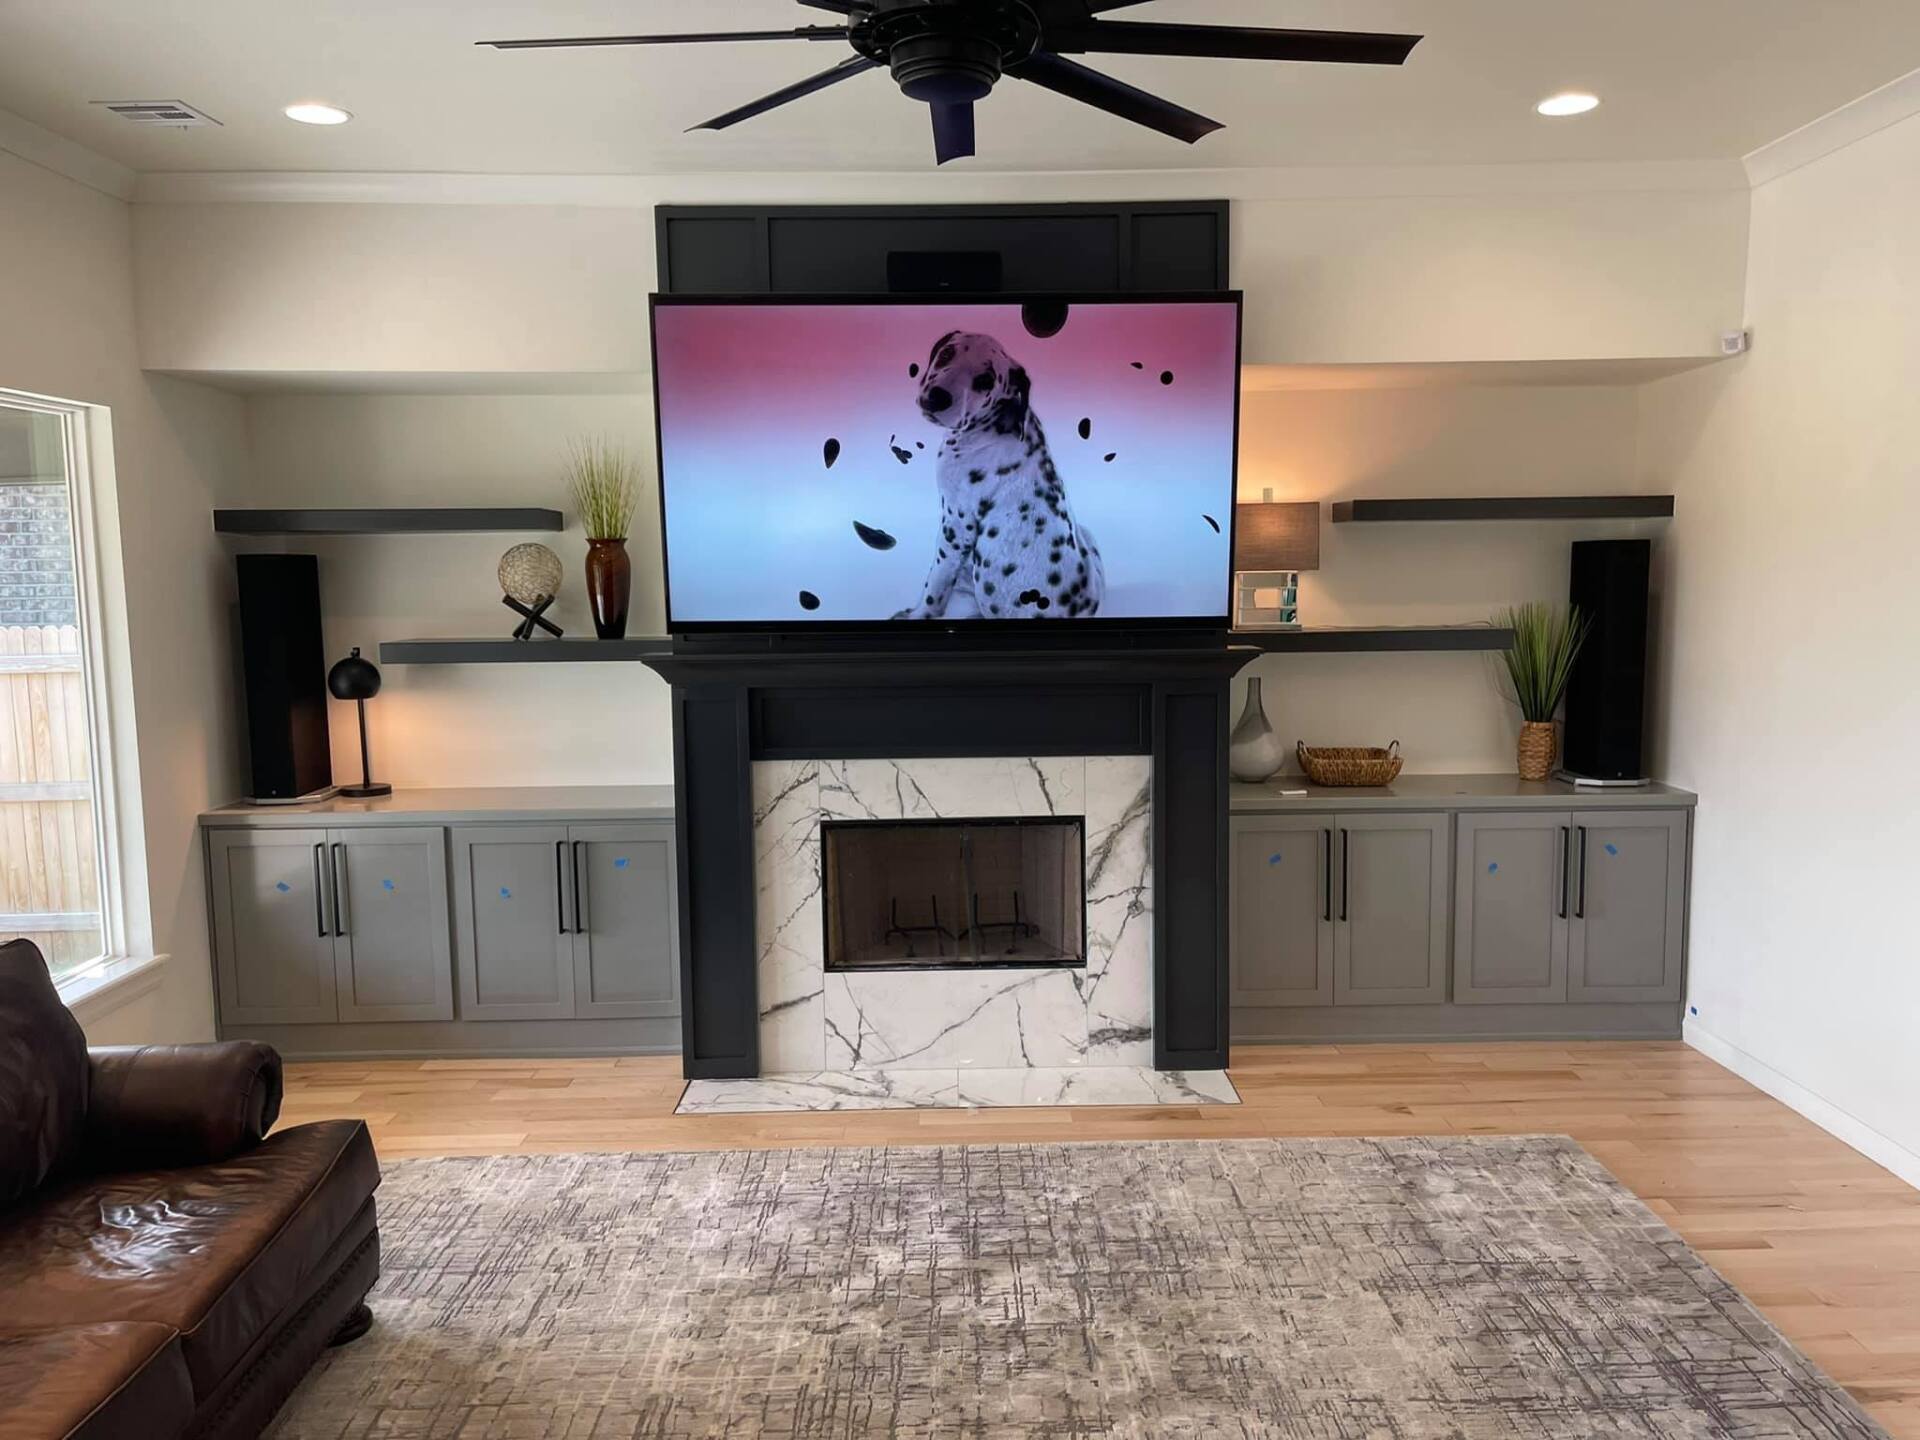 Mounted Television in the Fireplace - Tulsa, OK - Wired Solutions LLC